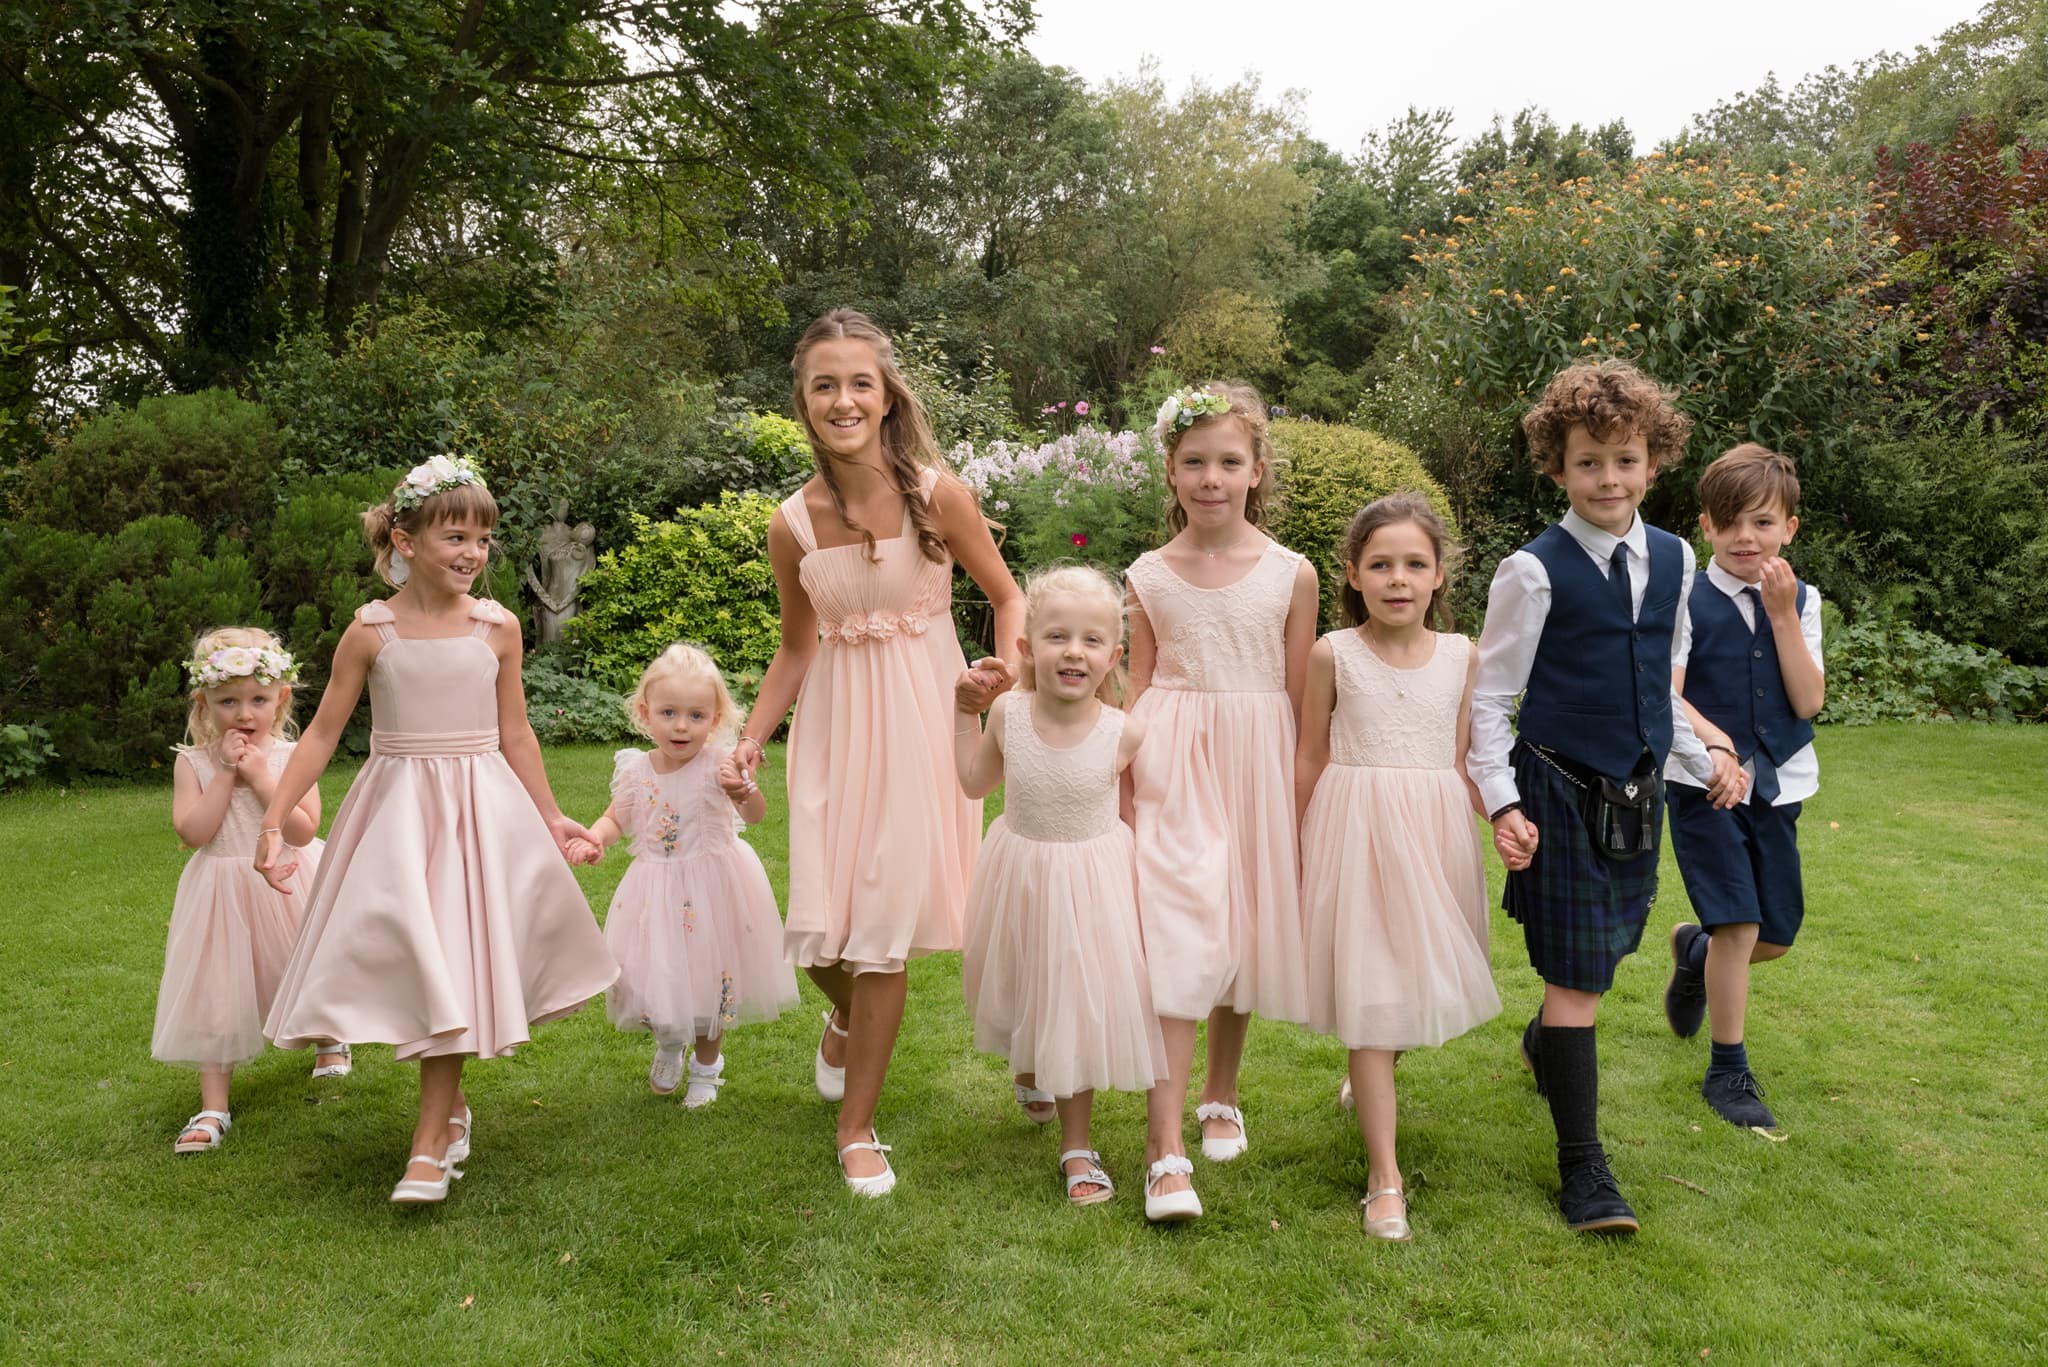 Flower girls and page boys walking hand in hand for a group photo